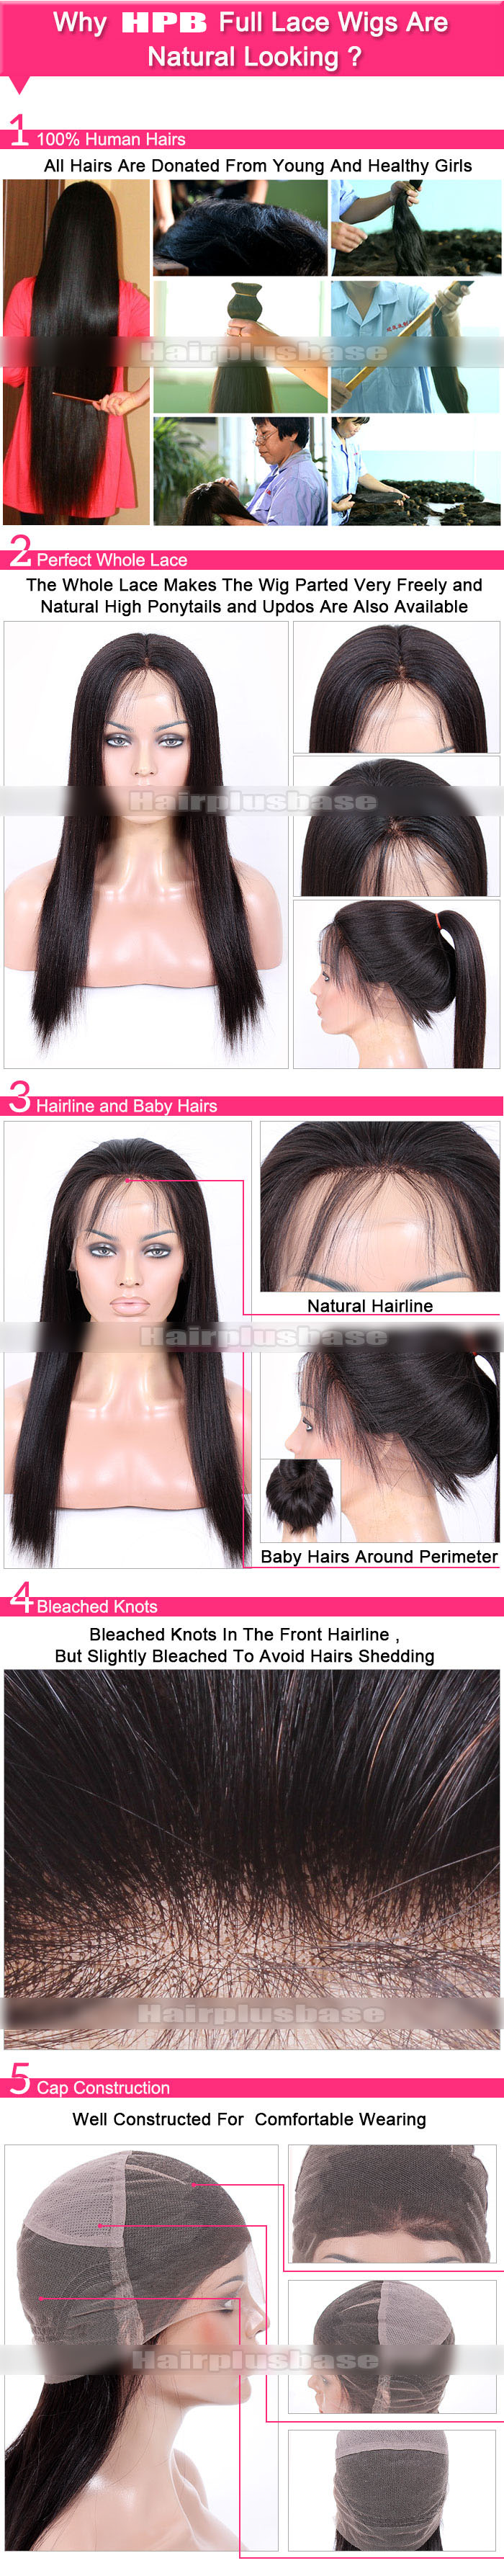 Full Lace WIG Natural looking 